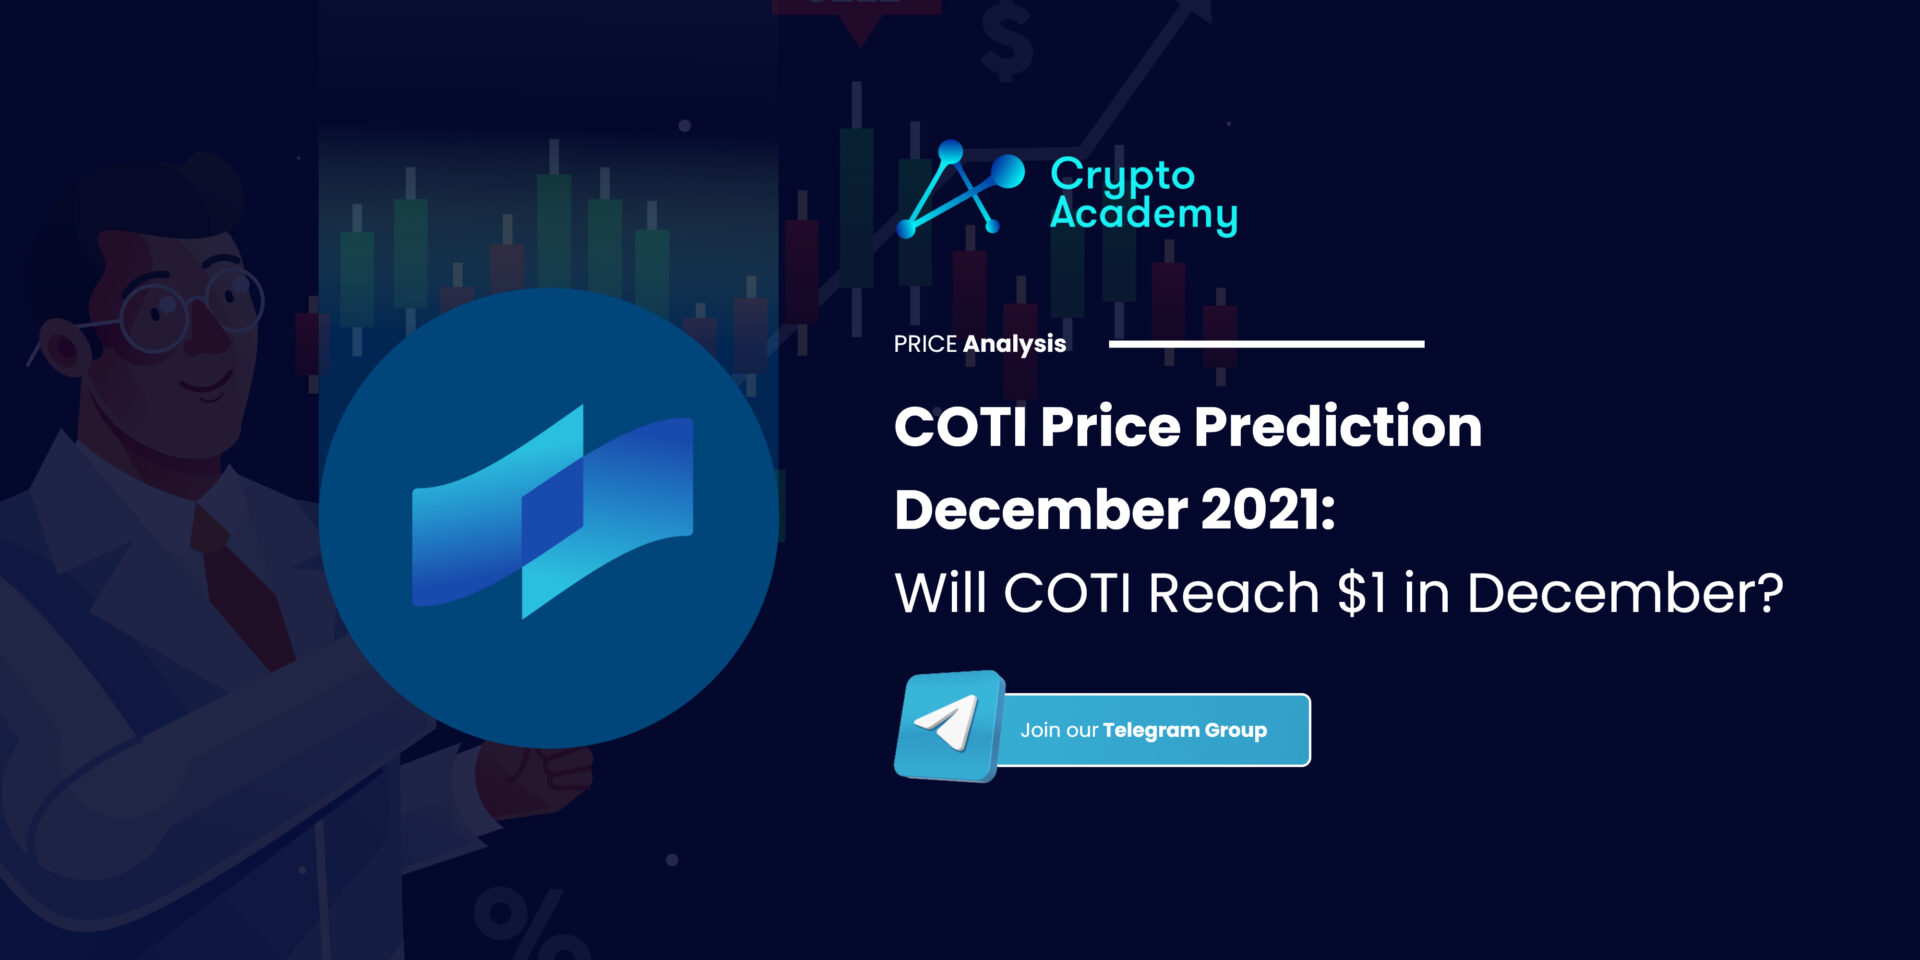 COTI Price Prediction December 2021: Will COTI Reach $1 in December?